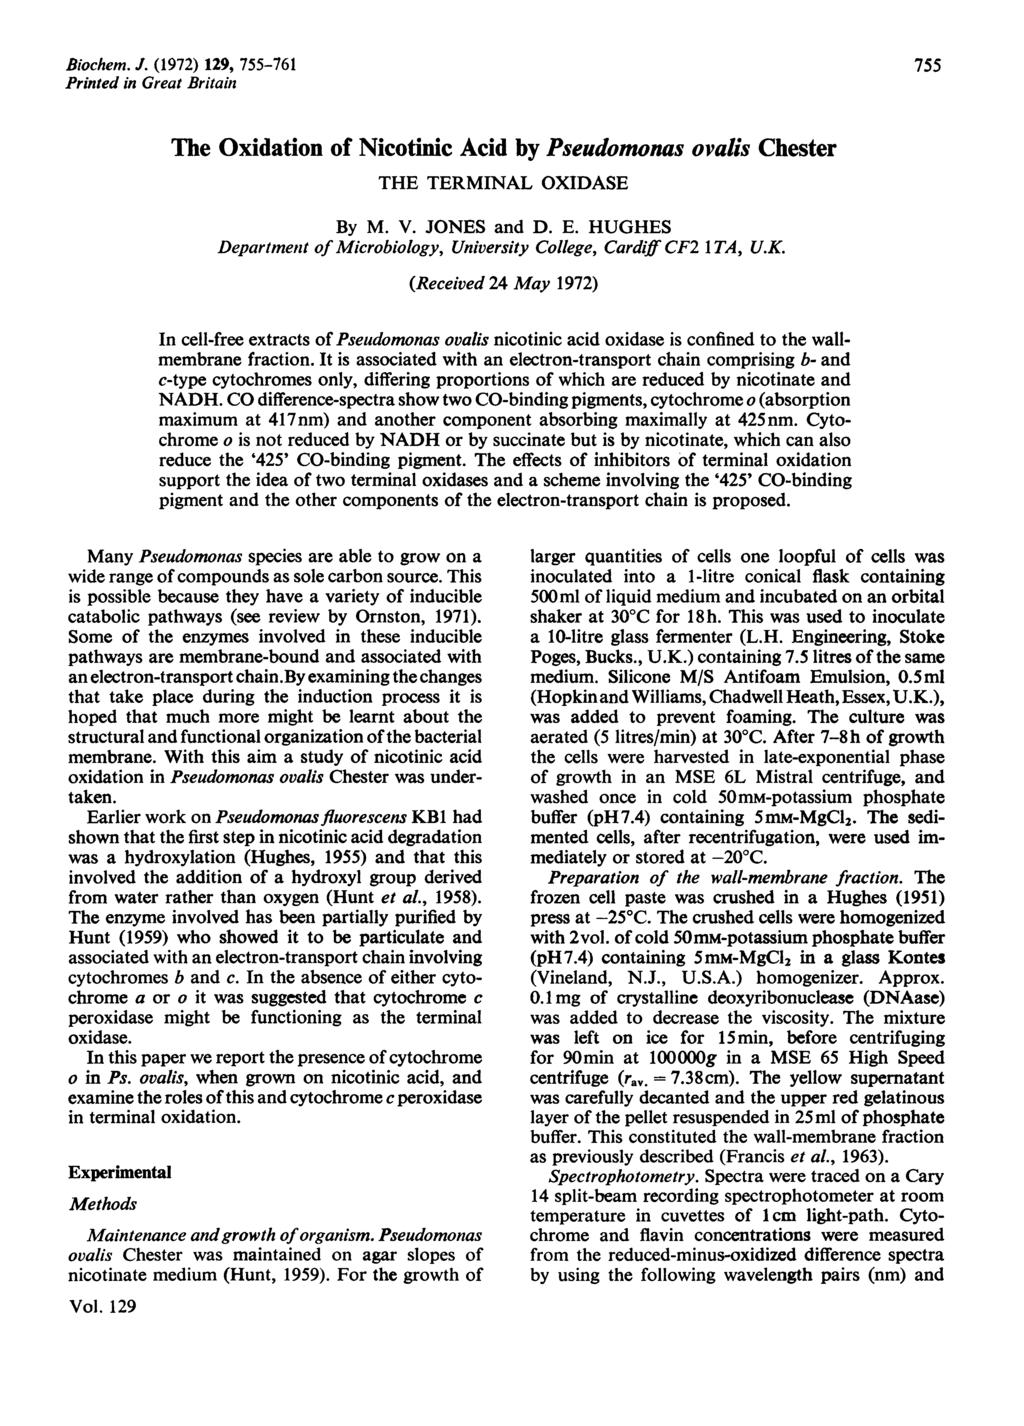 Biochem. J. (1972) 129, 755-761 Printed in Great Britain 755 The Oxidation of Nicotinic Acid by Pseudomonas ovalis Chester THE TERMNAL OXDASE By M. V. JONES and D. E.